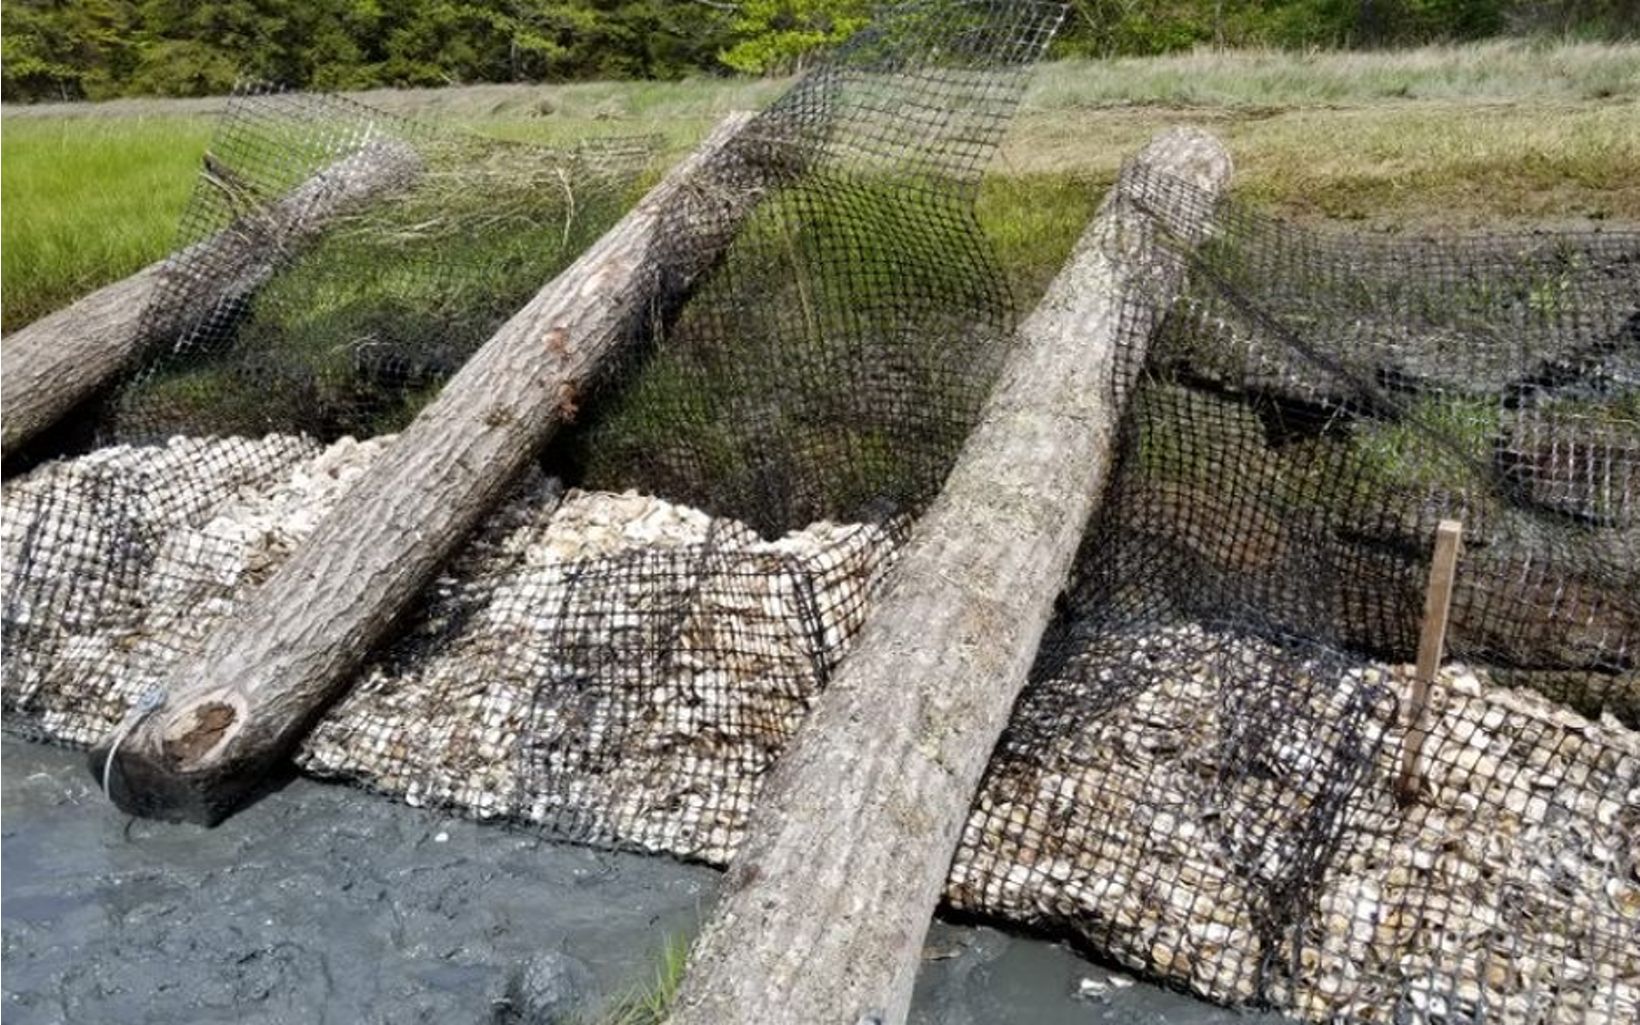 10-foot logs lean against a shorebank with oyster shell under netting beneath them.